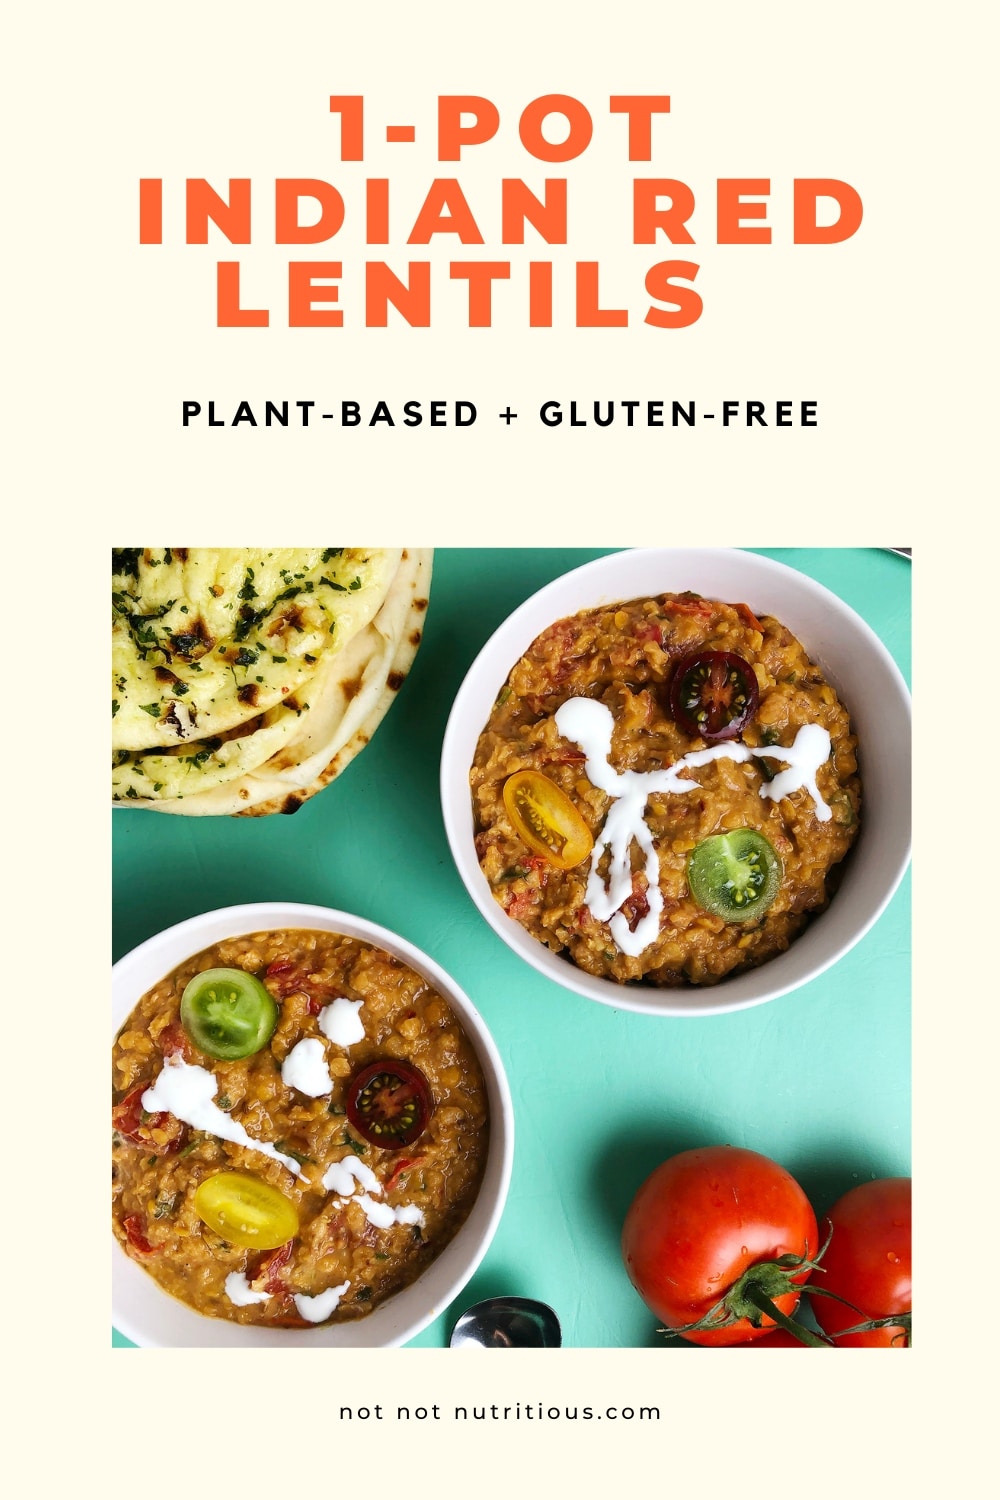 Pinterest Pin for 1-Pot Indian Red Lentils (Dal) plant-based and gluten free.